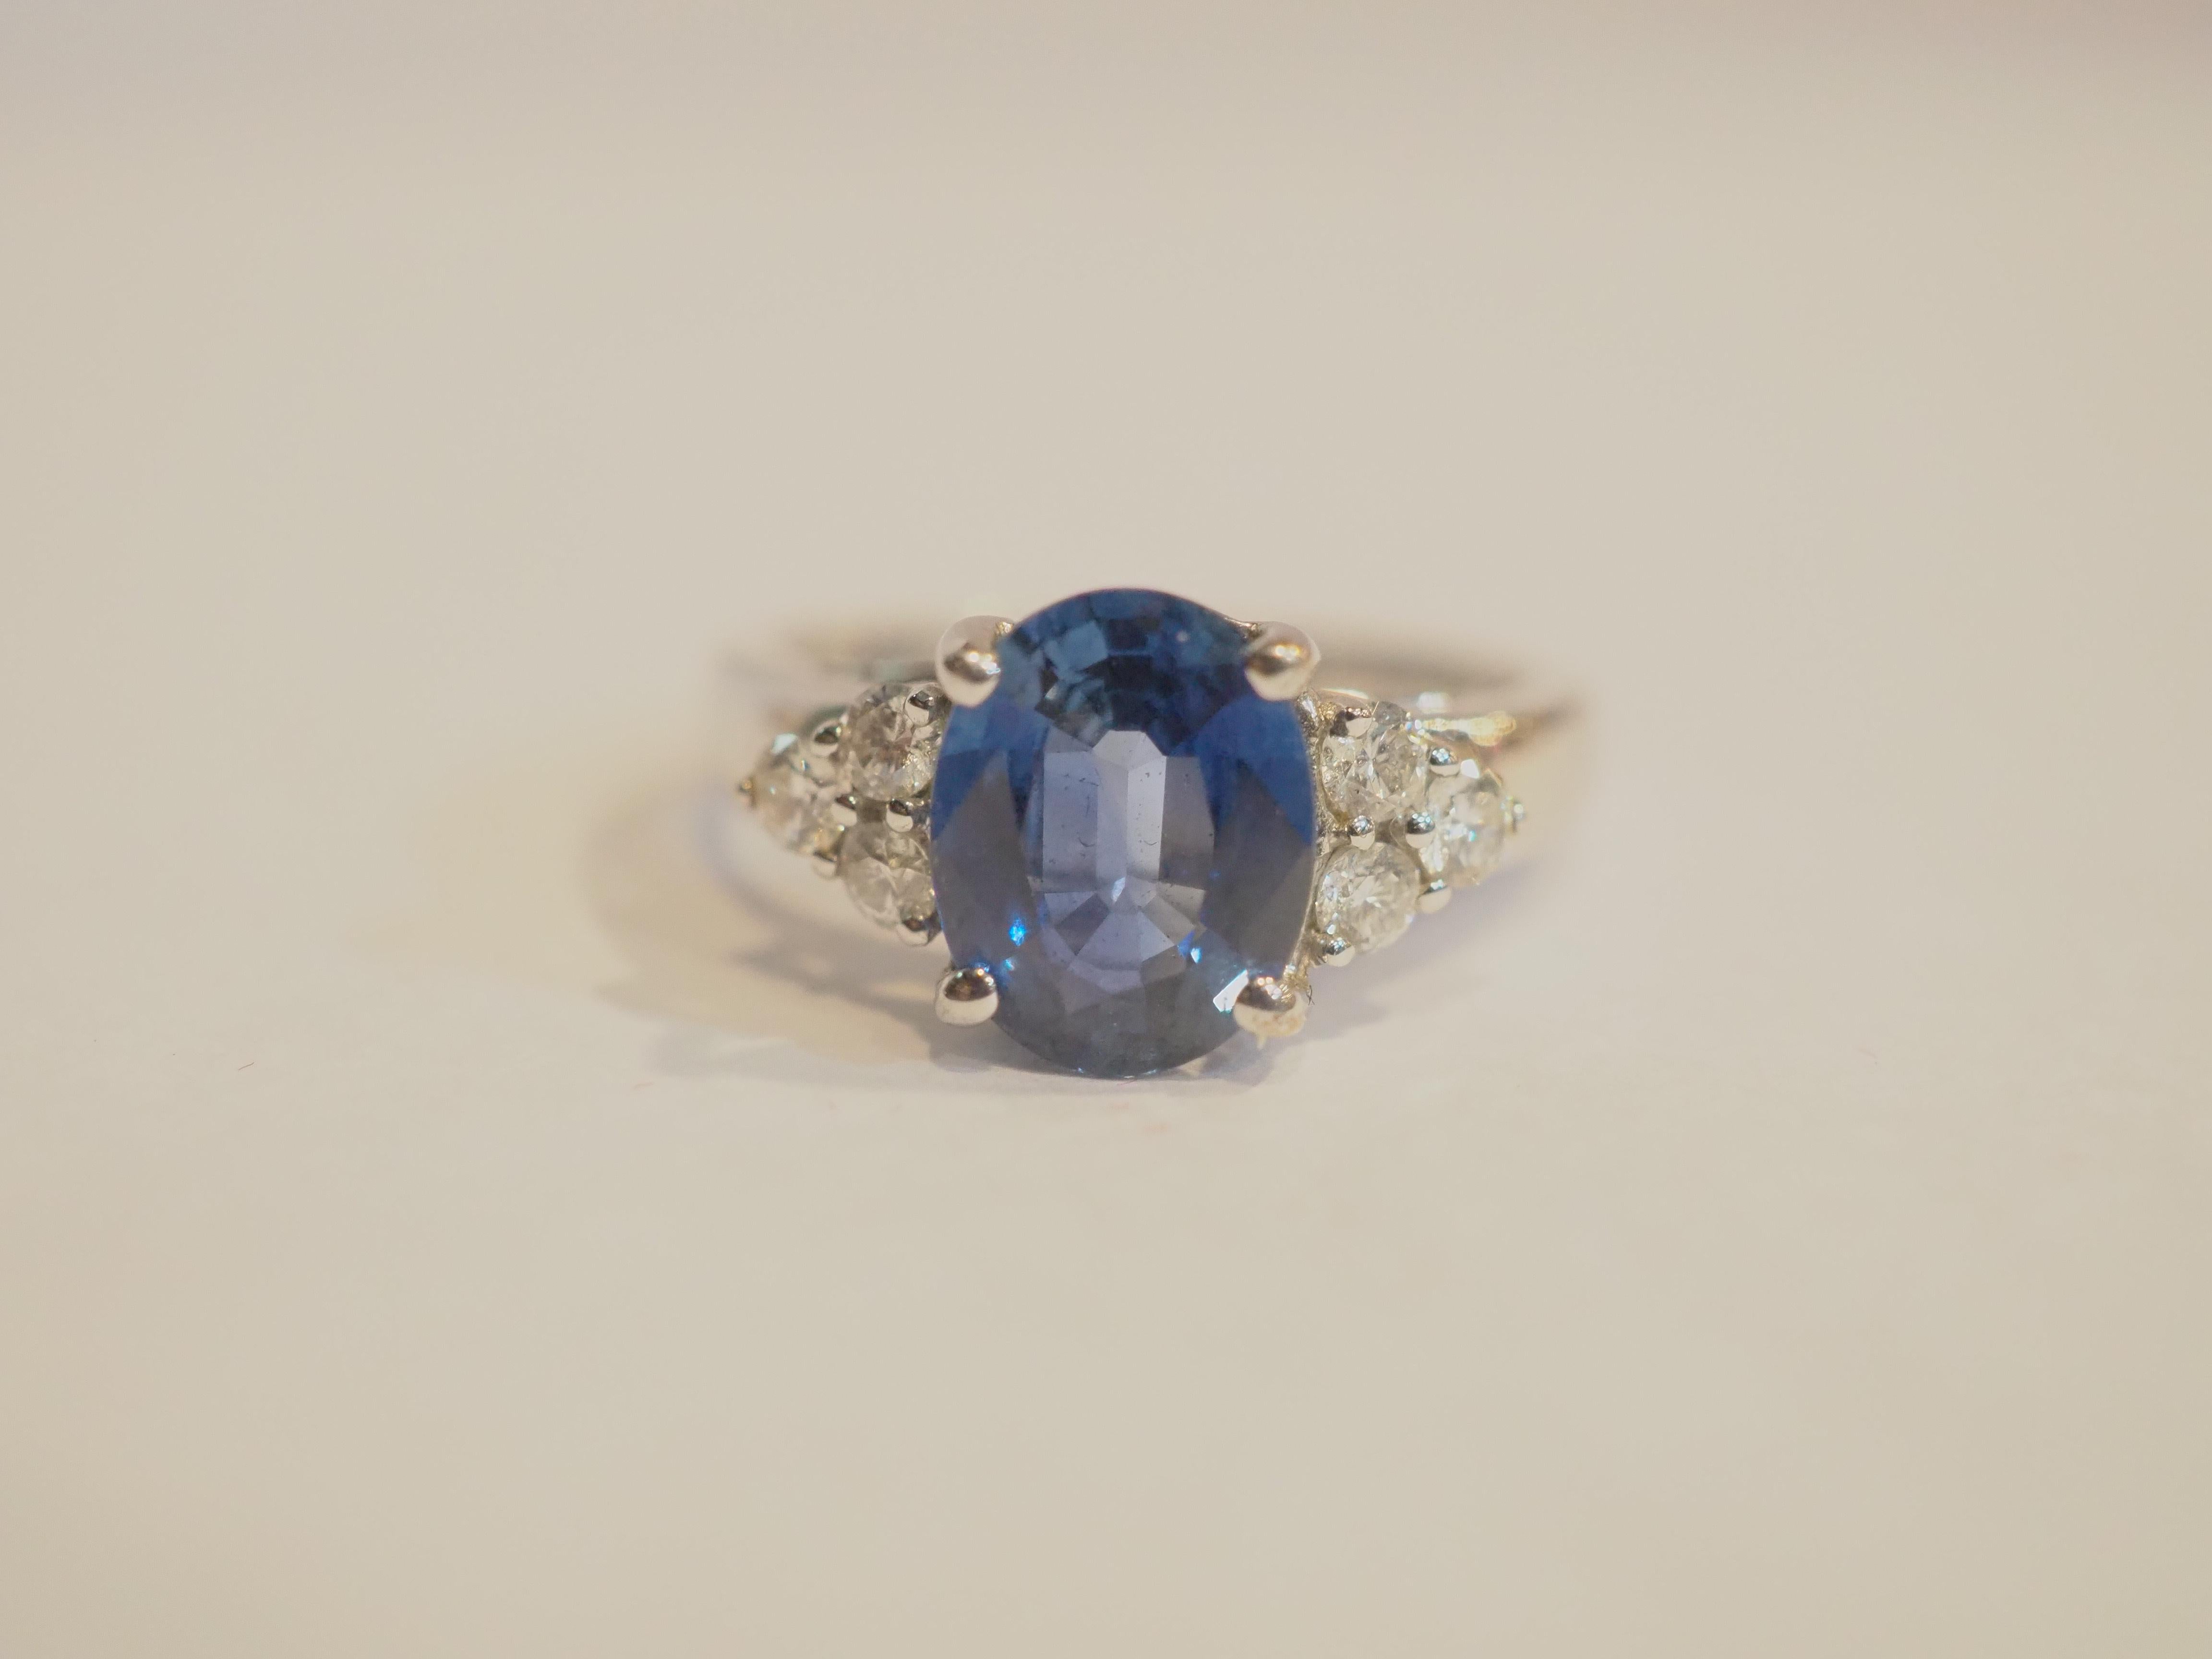 This beautiful engagement ring boasts a very stunning eye clean blue sapphire! The sapphire is an oval cut and is very clear with good saturation of blue color. There are 6 round 2mm brilliant diamonds accenting the ring. The diamonds are of good